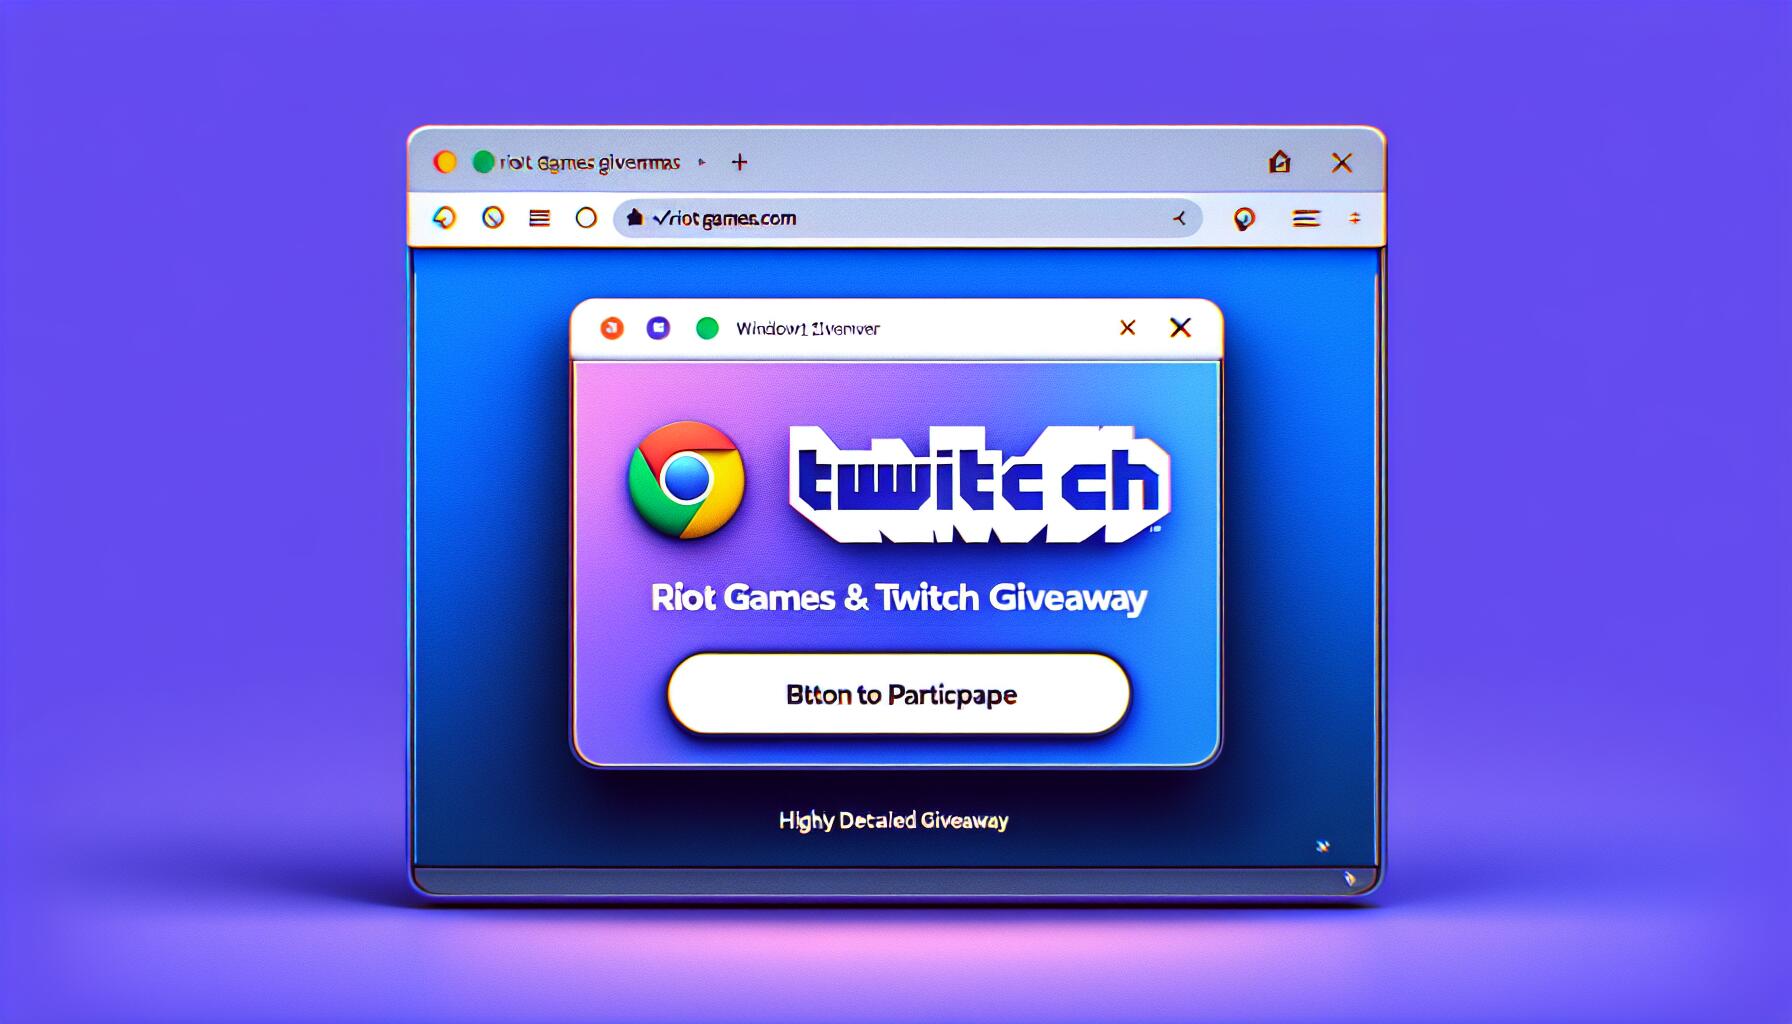 riot games & twitch giveaway ads